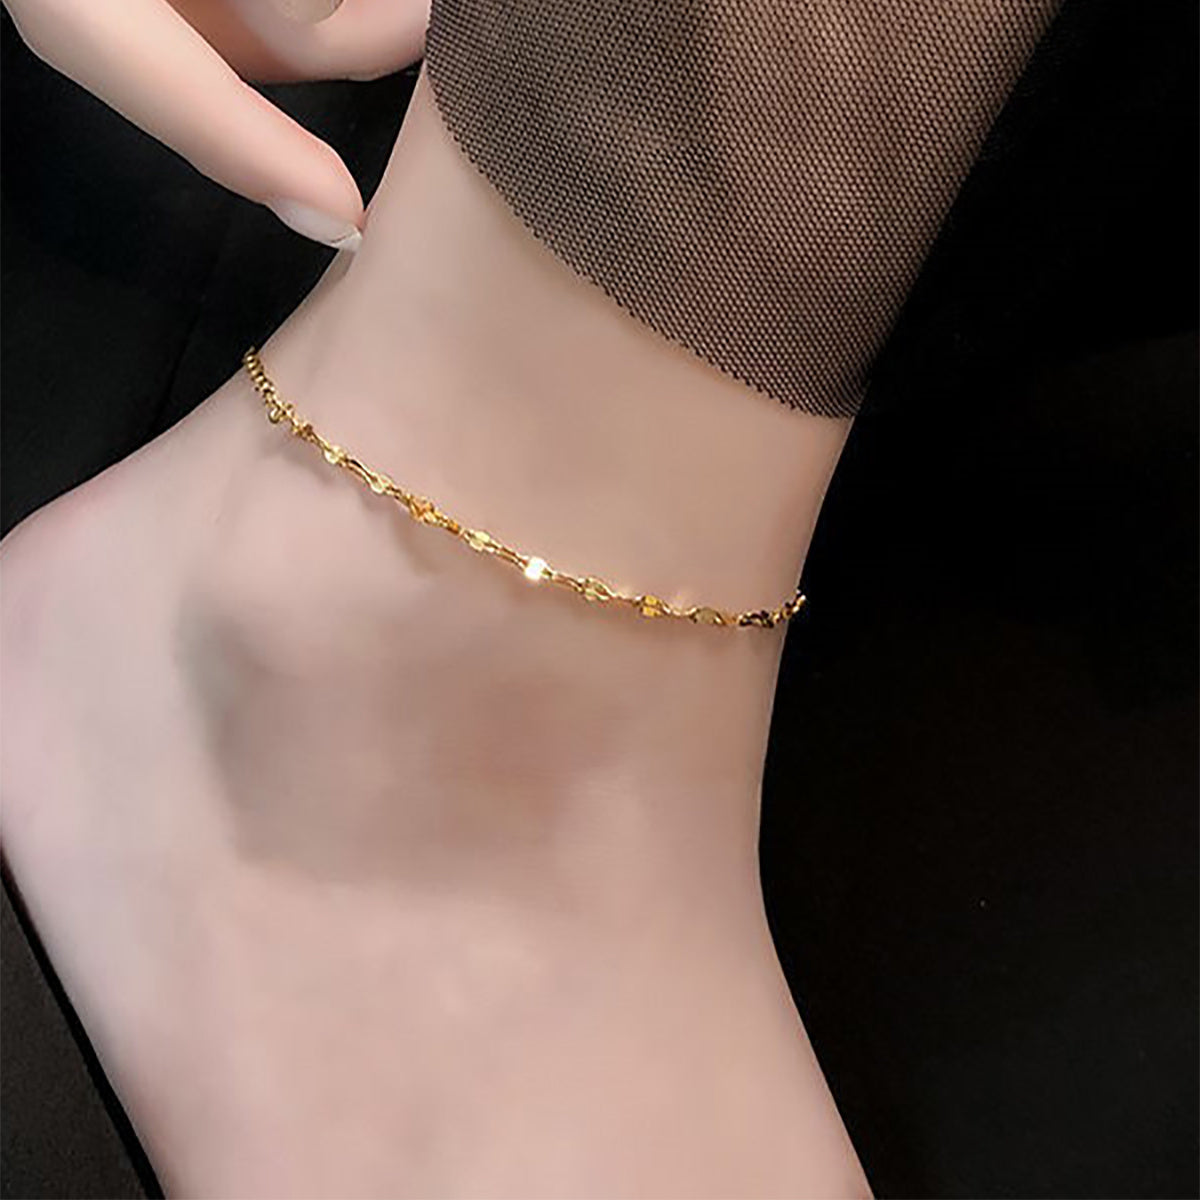 Stainless Steel Anklet For Women Foot Jewelry